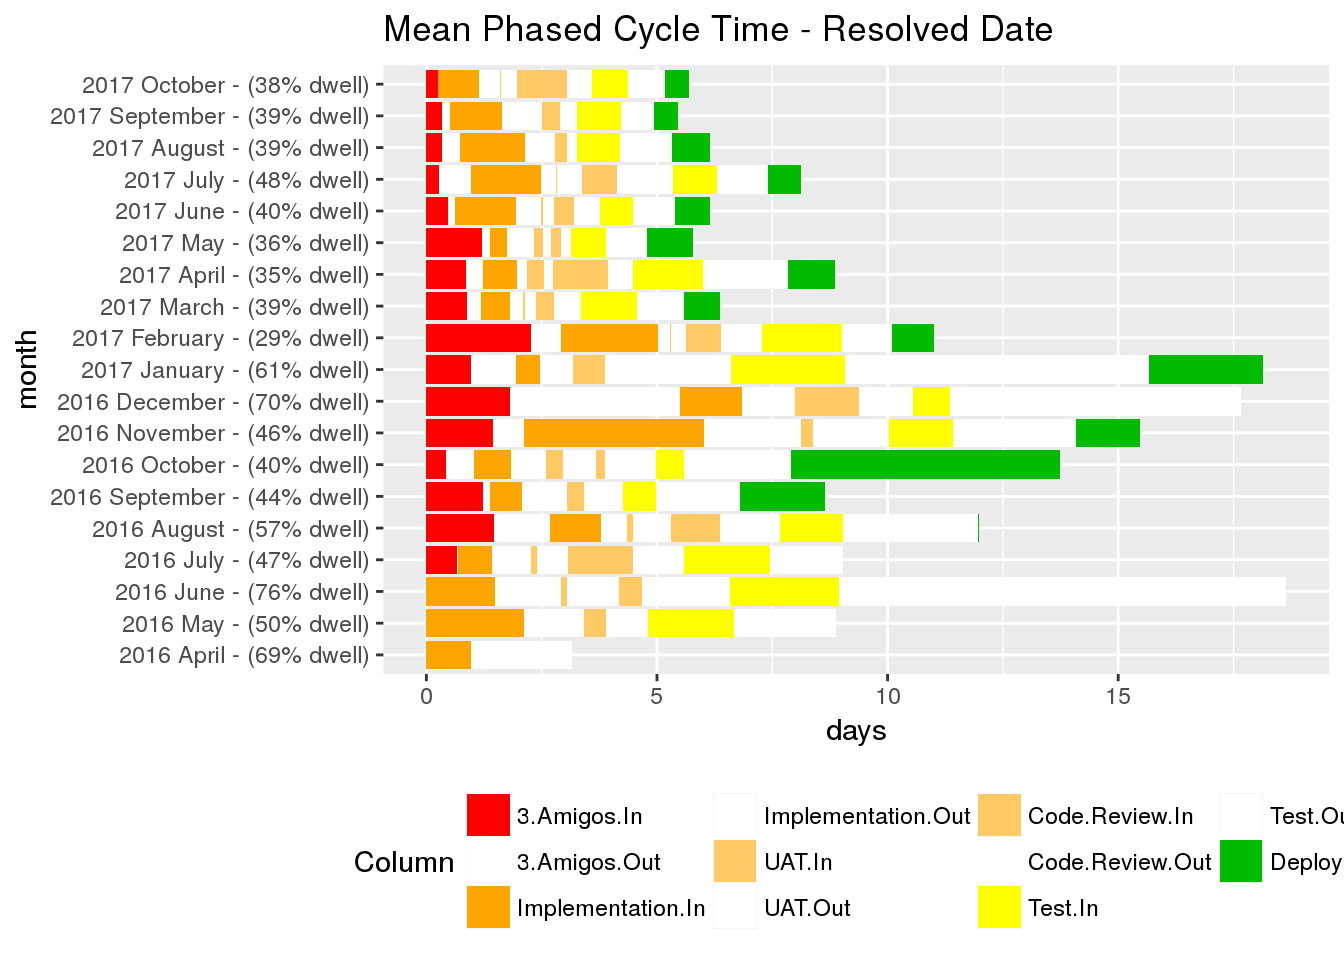 JiraR Phased Cycle Time diagram